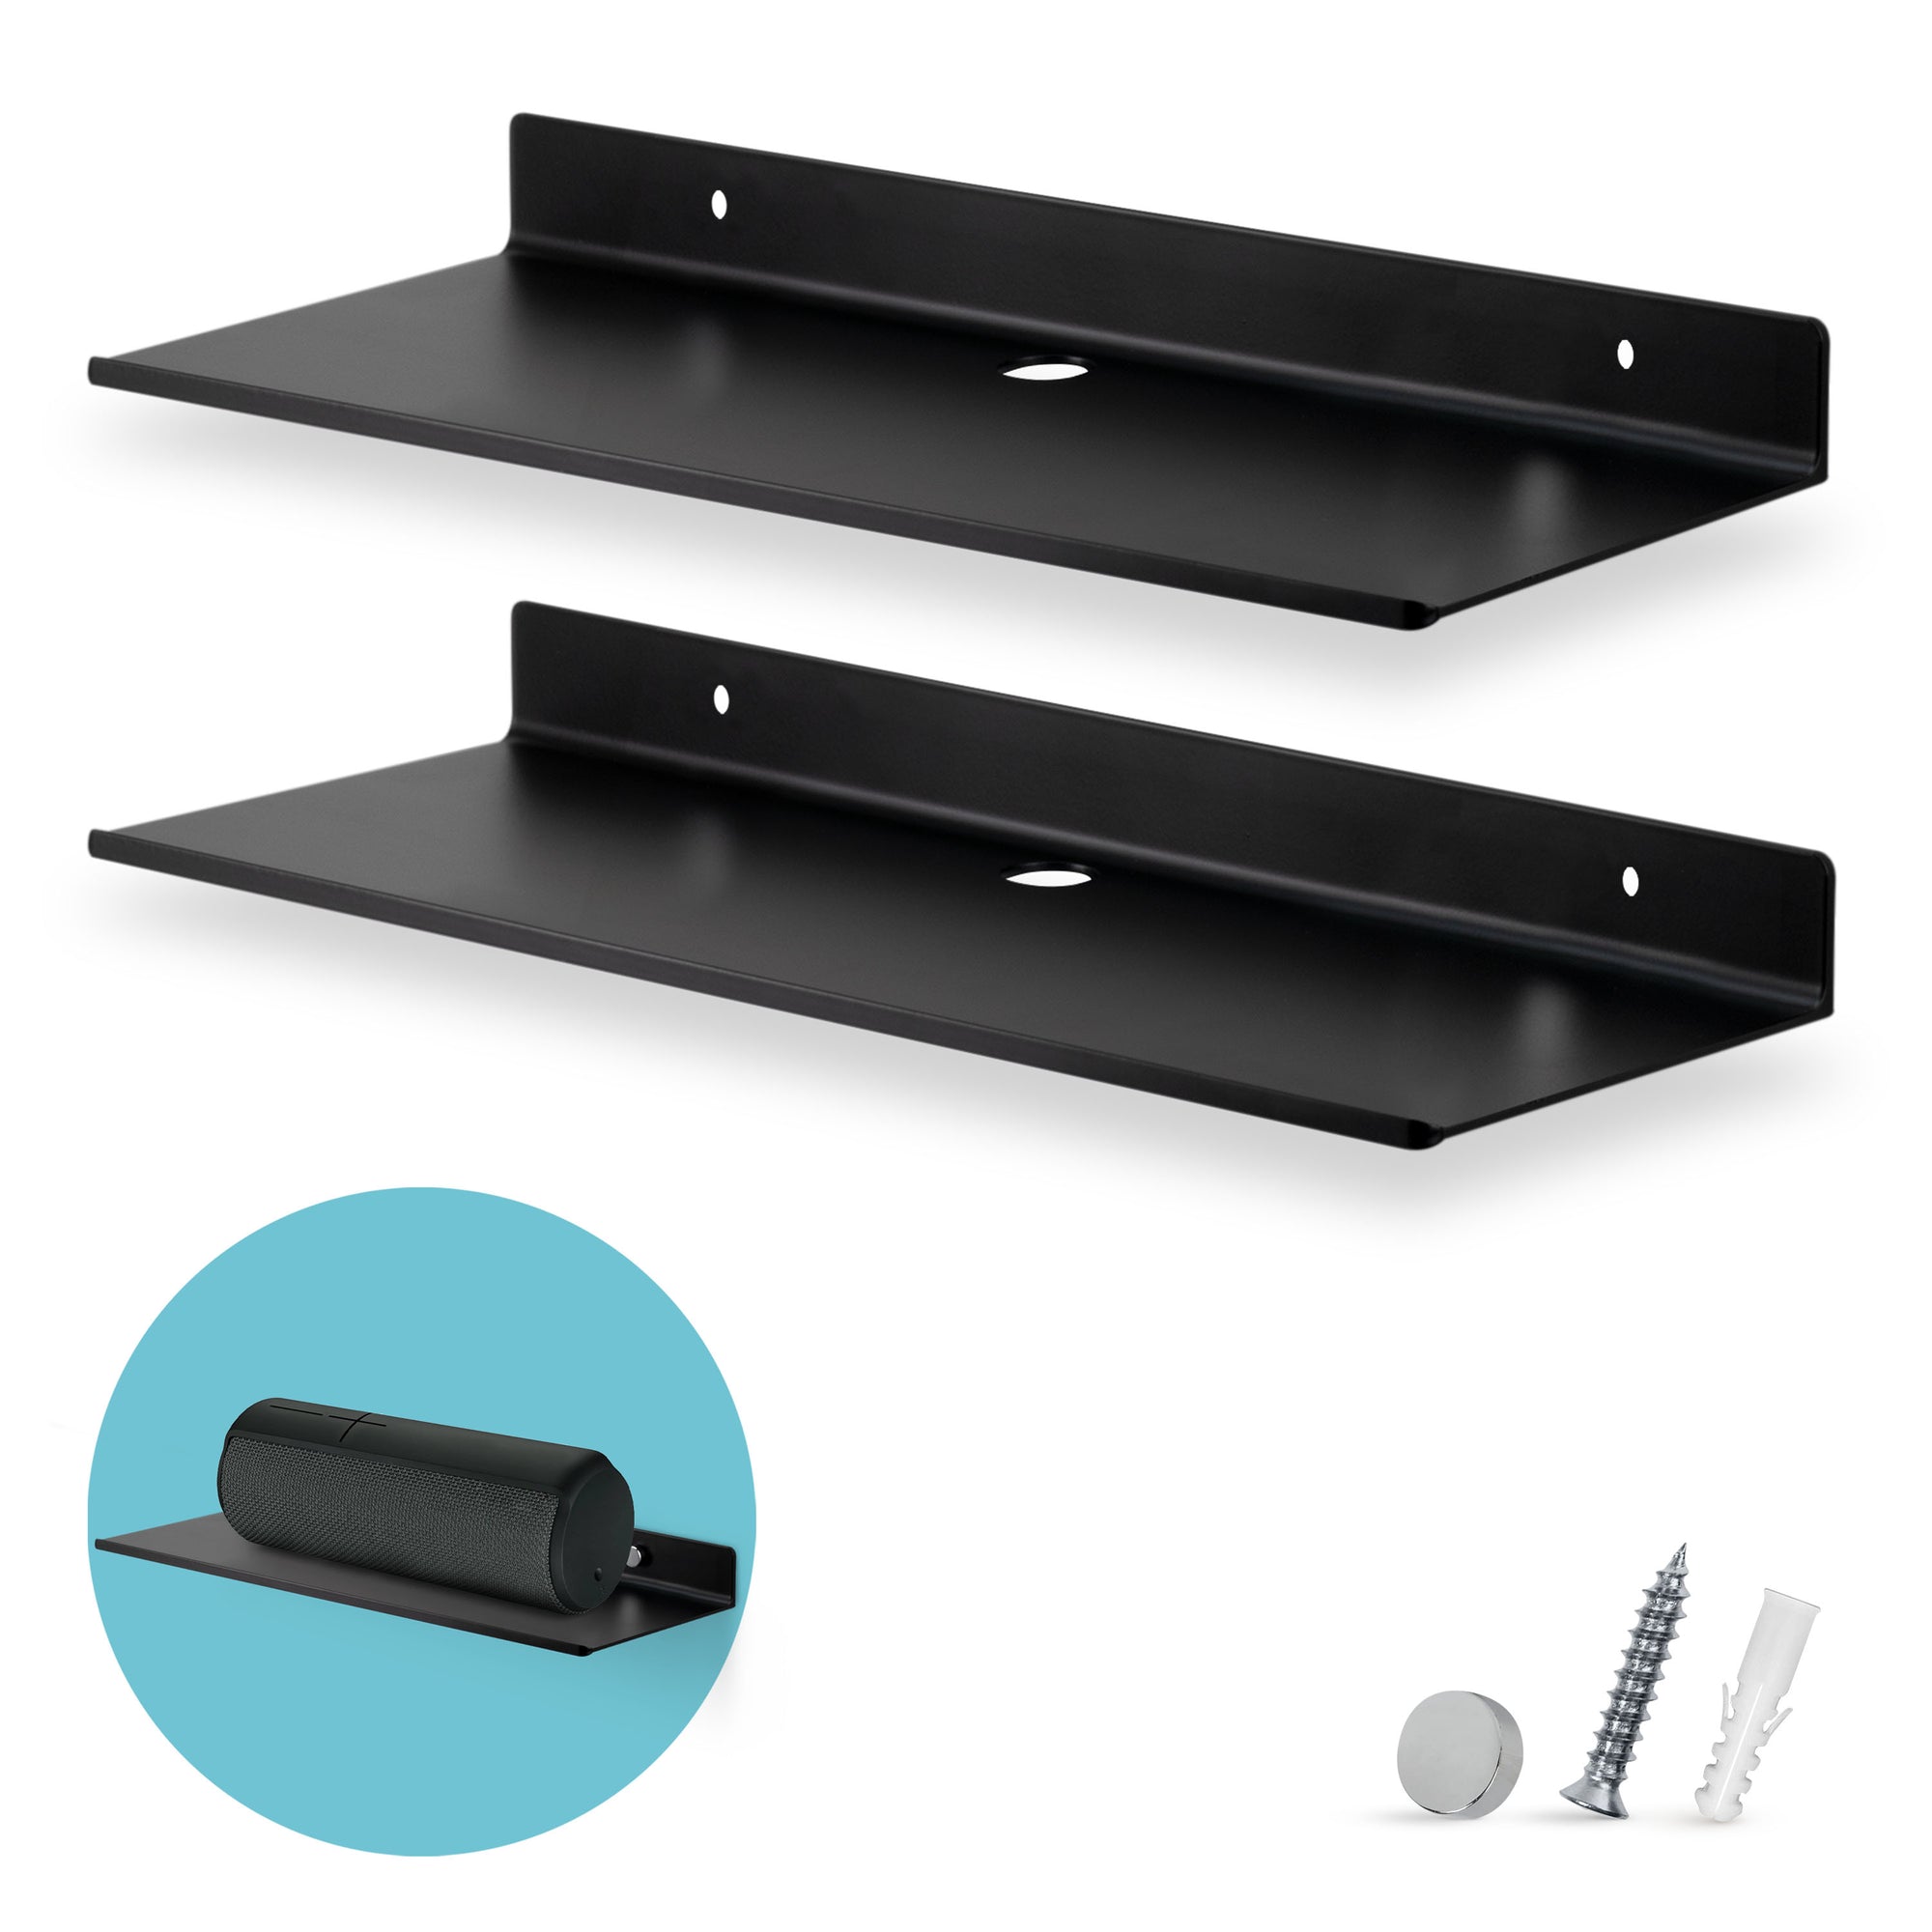 2-Pack 12" Floating Metal Wall Shelf for Speakers, Books, Decor, Plants, Cameras, Photos, Kitchen, Toilet, Routers & More Universal Small Holder Shelves